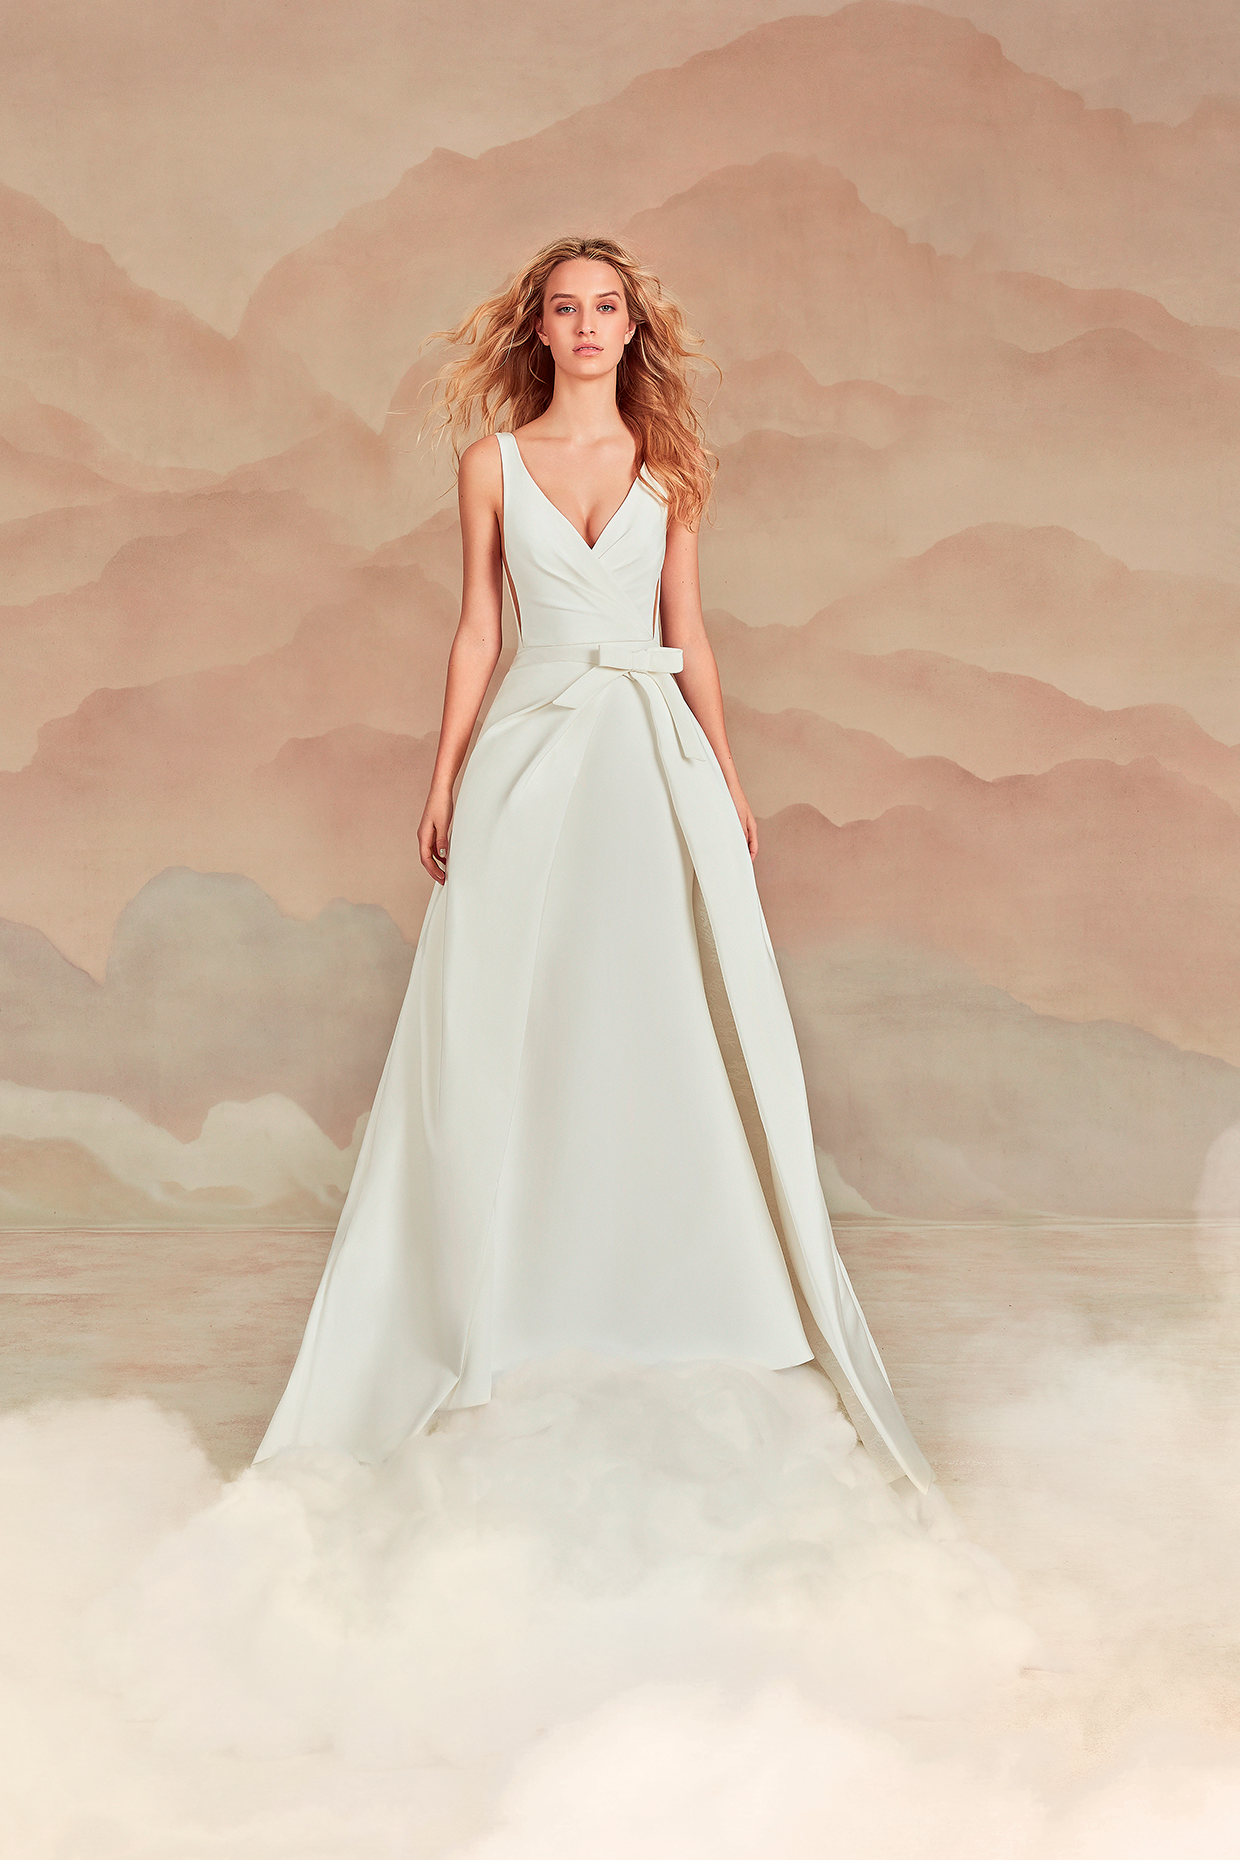 Ines Di Santo Spring 2022 Bridal Couture Collection - Elen Dress, Front View With Overskirt